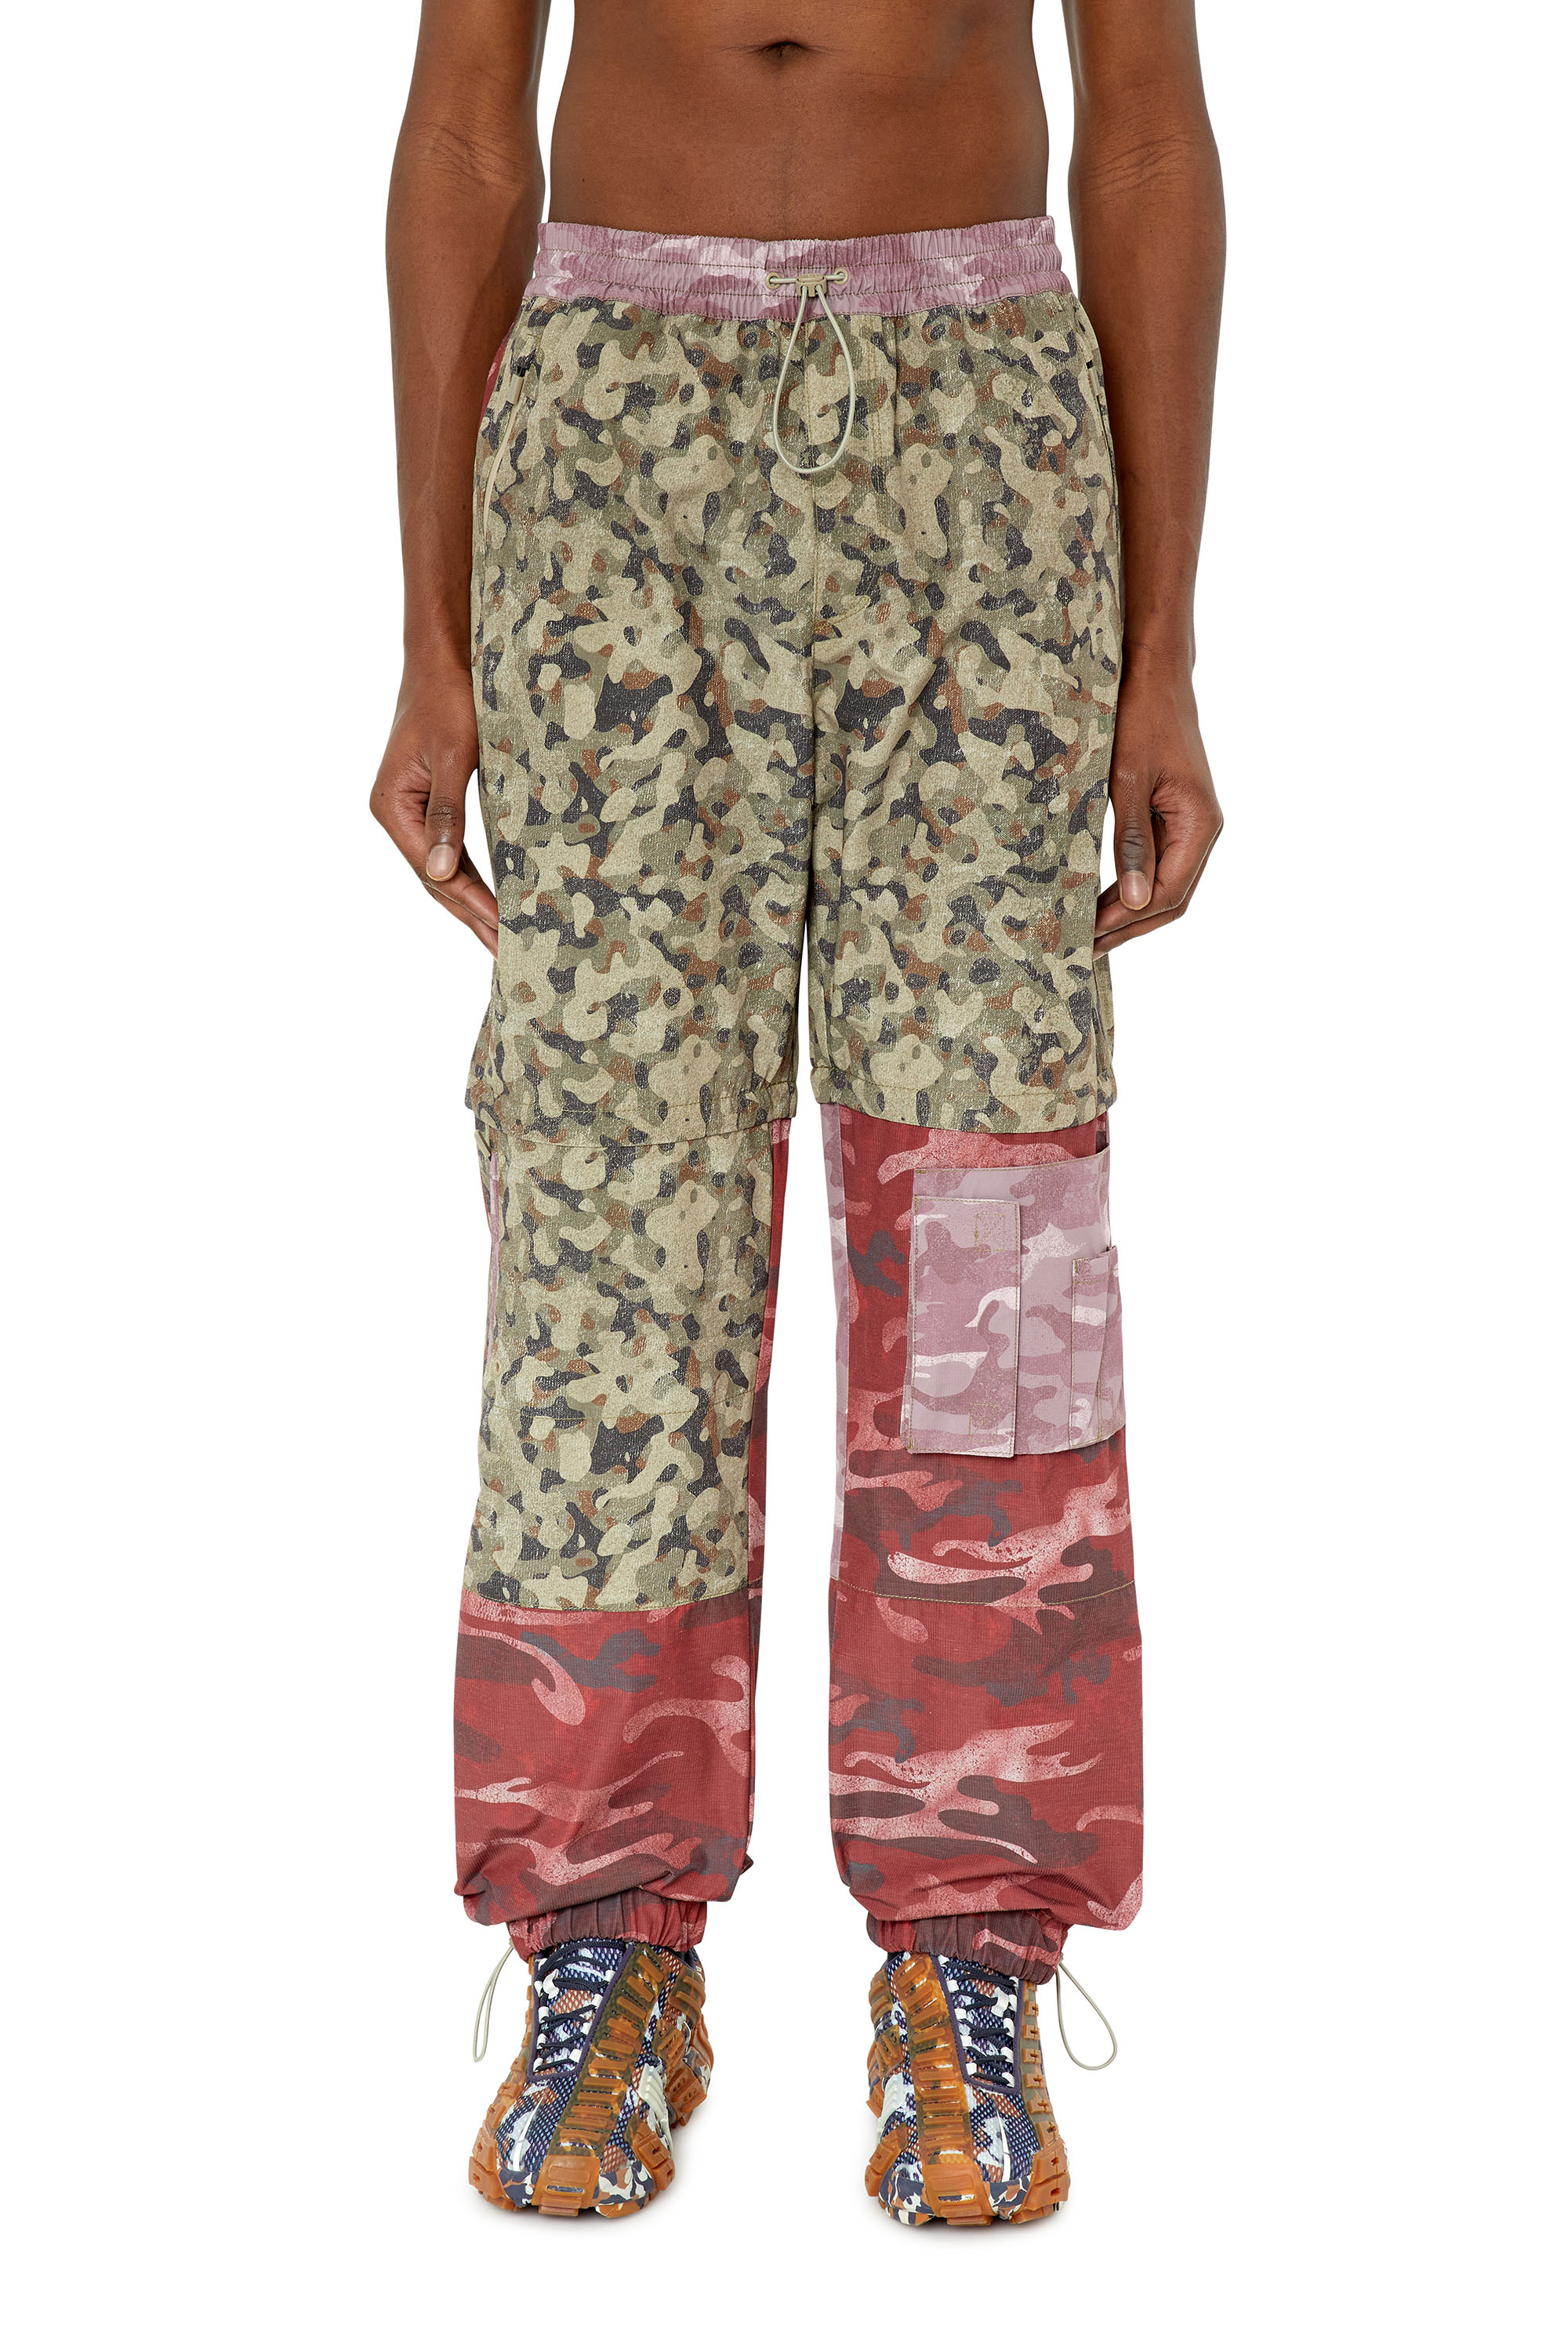 AMWB-SIFAN-HT08 Man: 2-in-1 pants with contrast camo prints